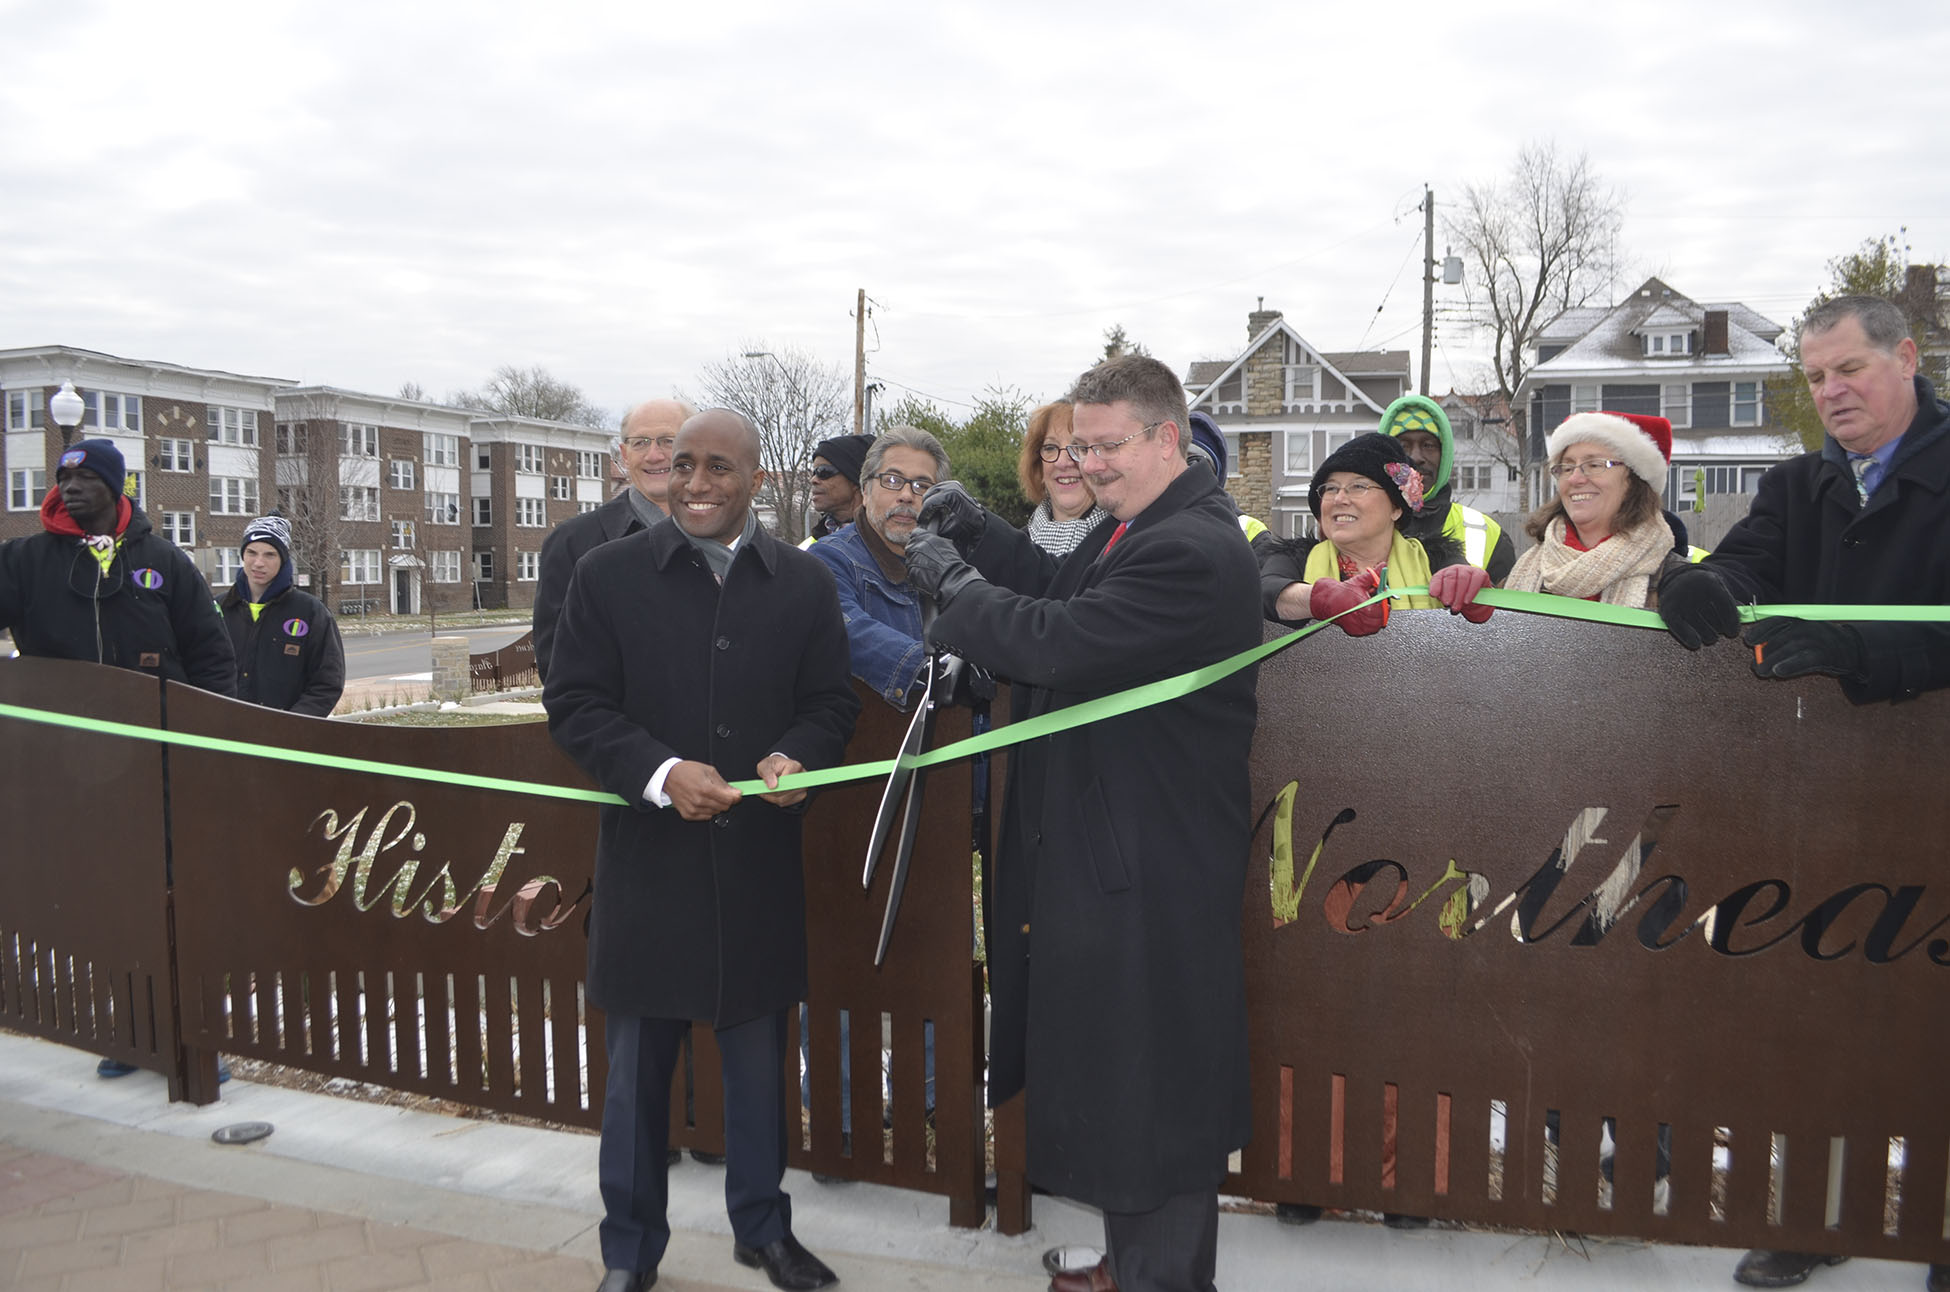 Councilman Scott Wagner (right) cuts the ribbon at the Independence and Benton groundbreaking ceremony in December 2016.